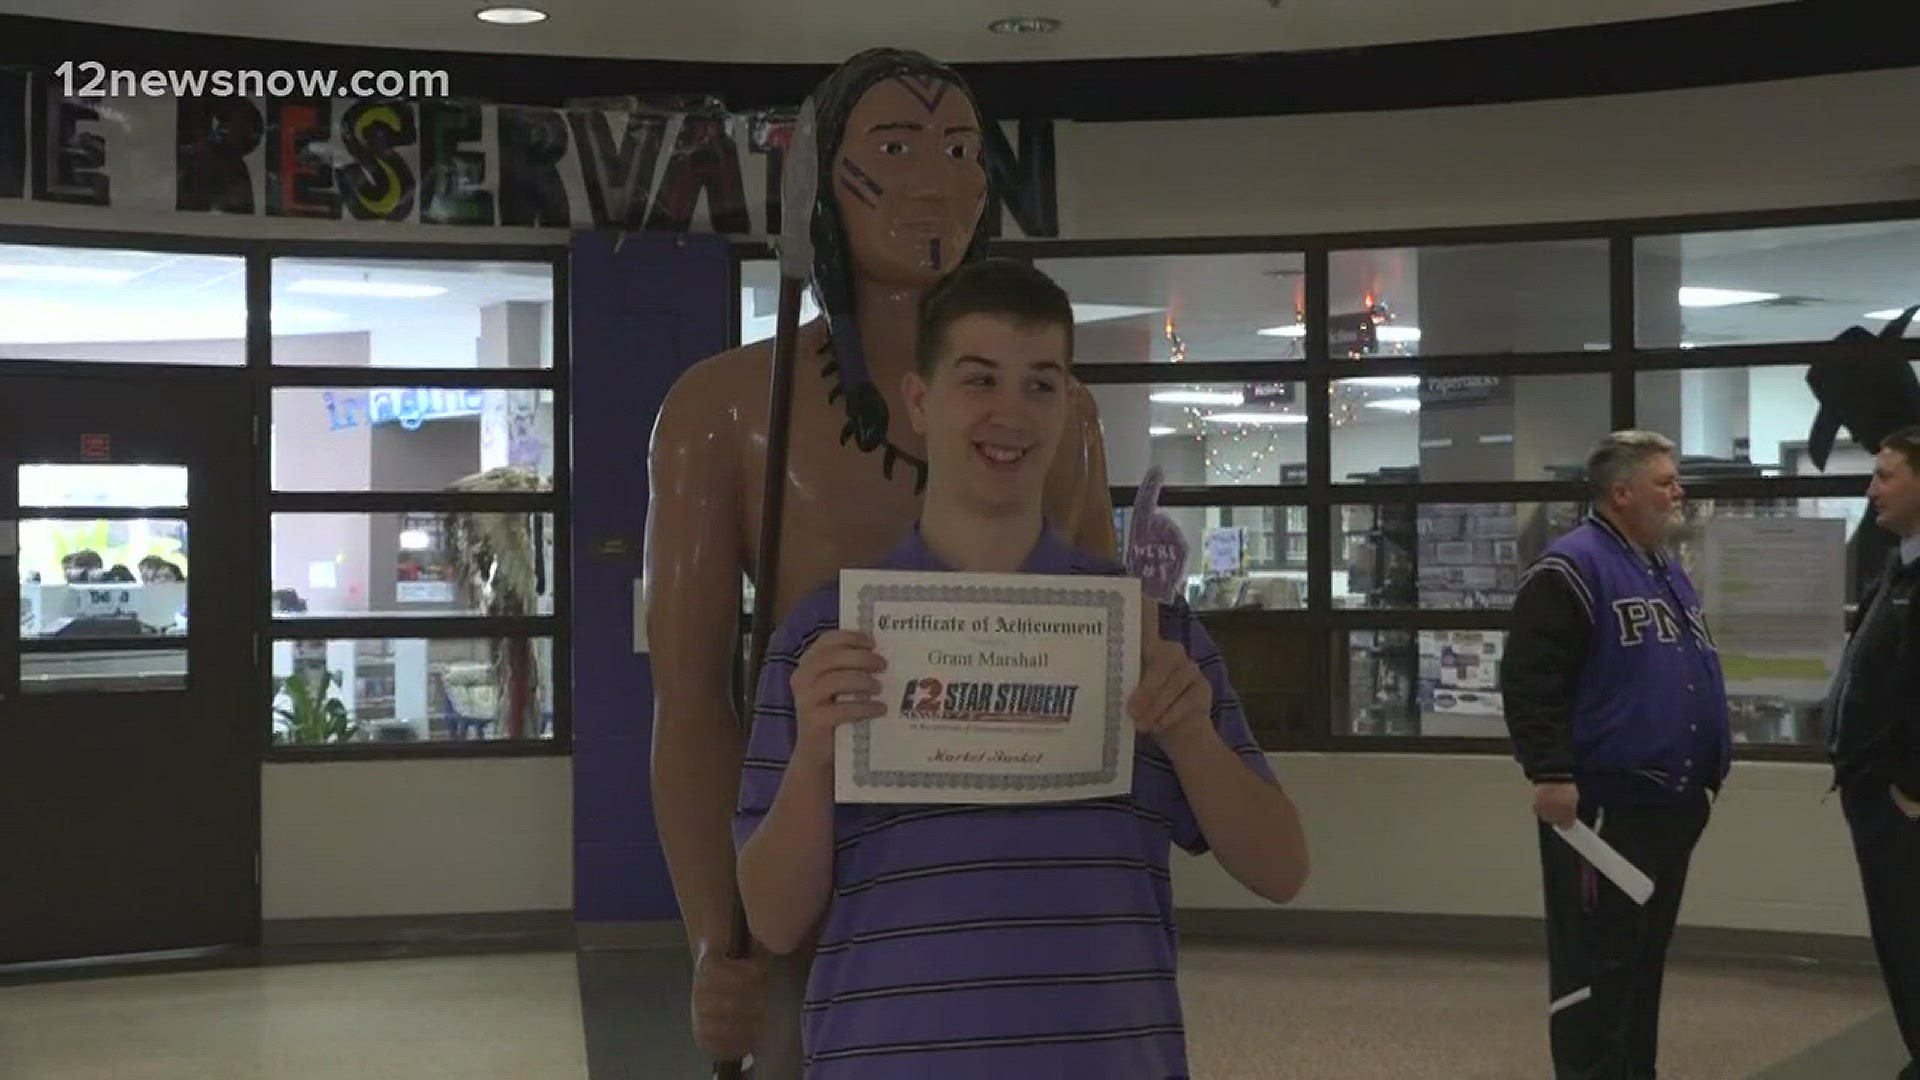 Grant Marshall is a name well known around Port Neches-Groves High School. He is autistic and struggled to go to pep rallies at the school. But now he is leading them and inspiring others.